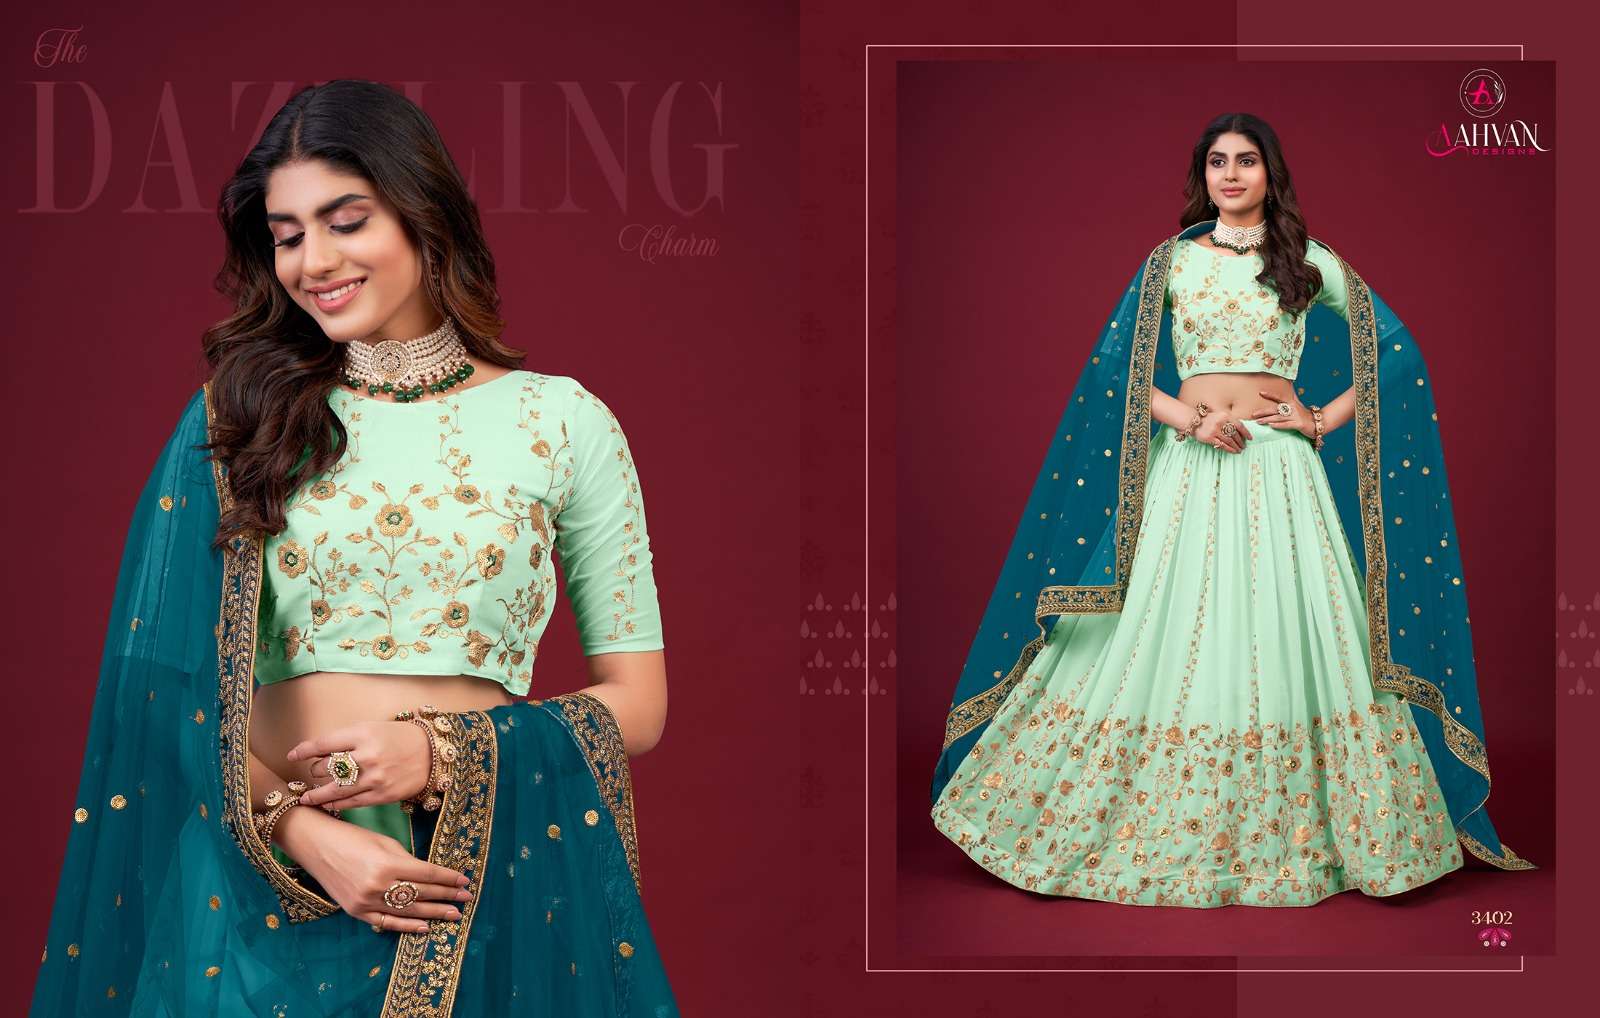 Glamour By Aahvan 3401 To 3404 Series Wedding Wear Collection Beautiful Stylish Colorful Fancy Party Wear & Occasional Wear Faux Georgette Lehengas At Wholesale Price